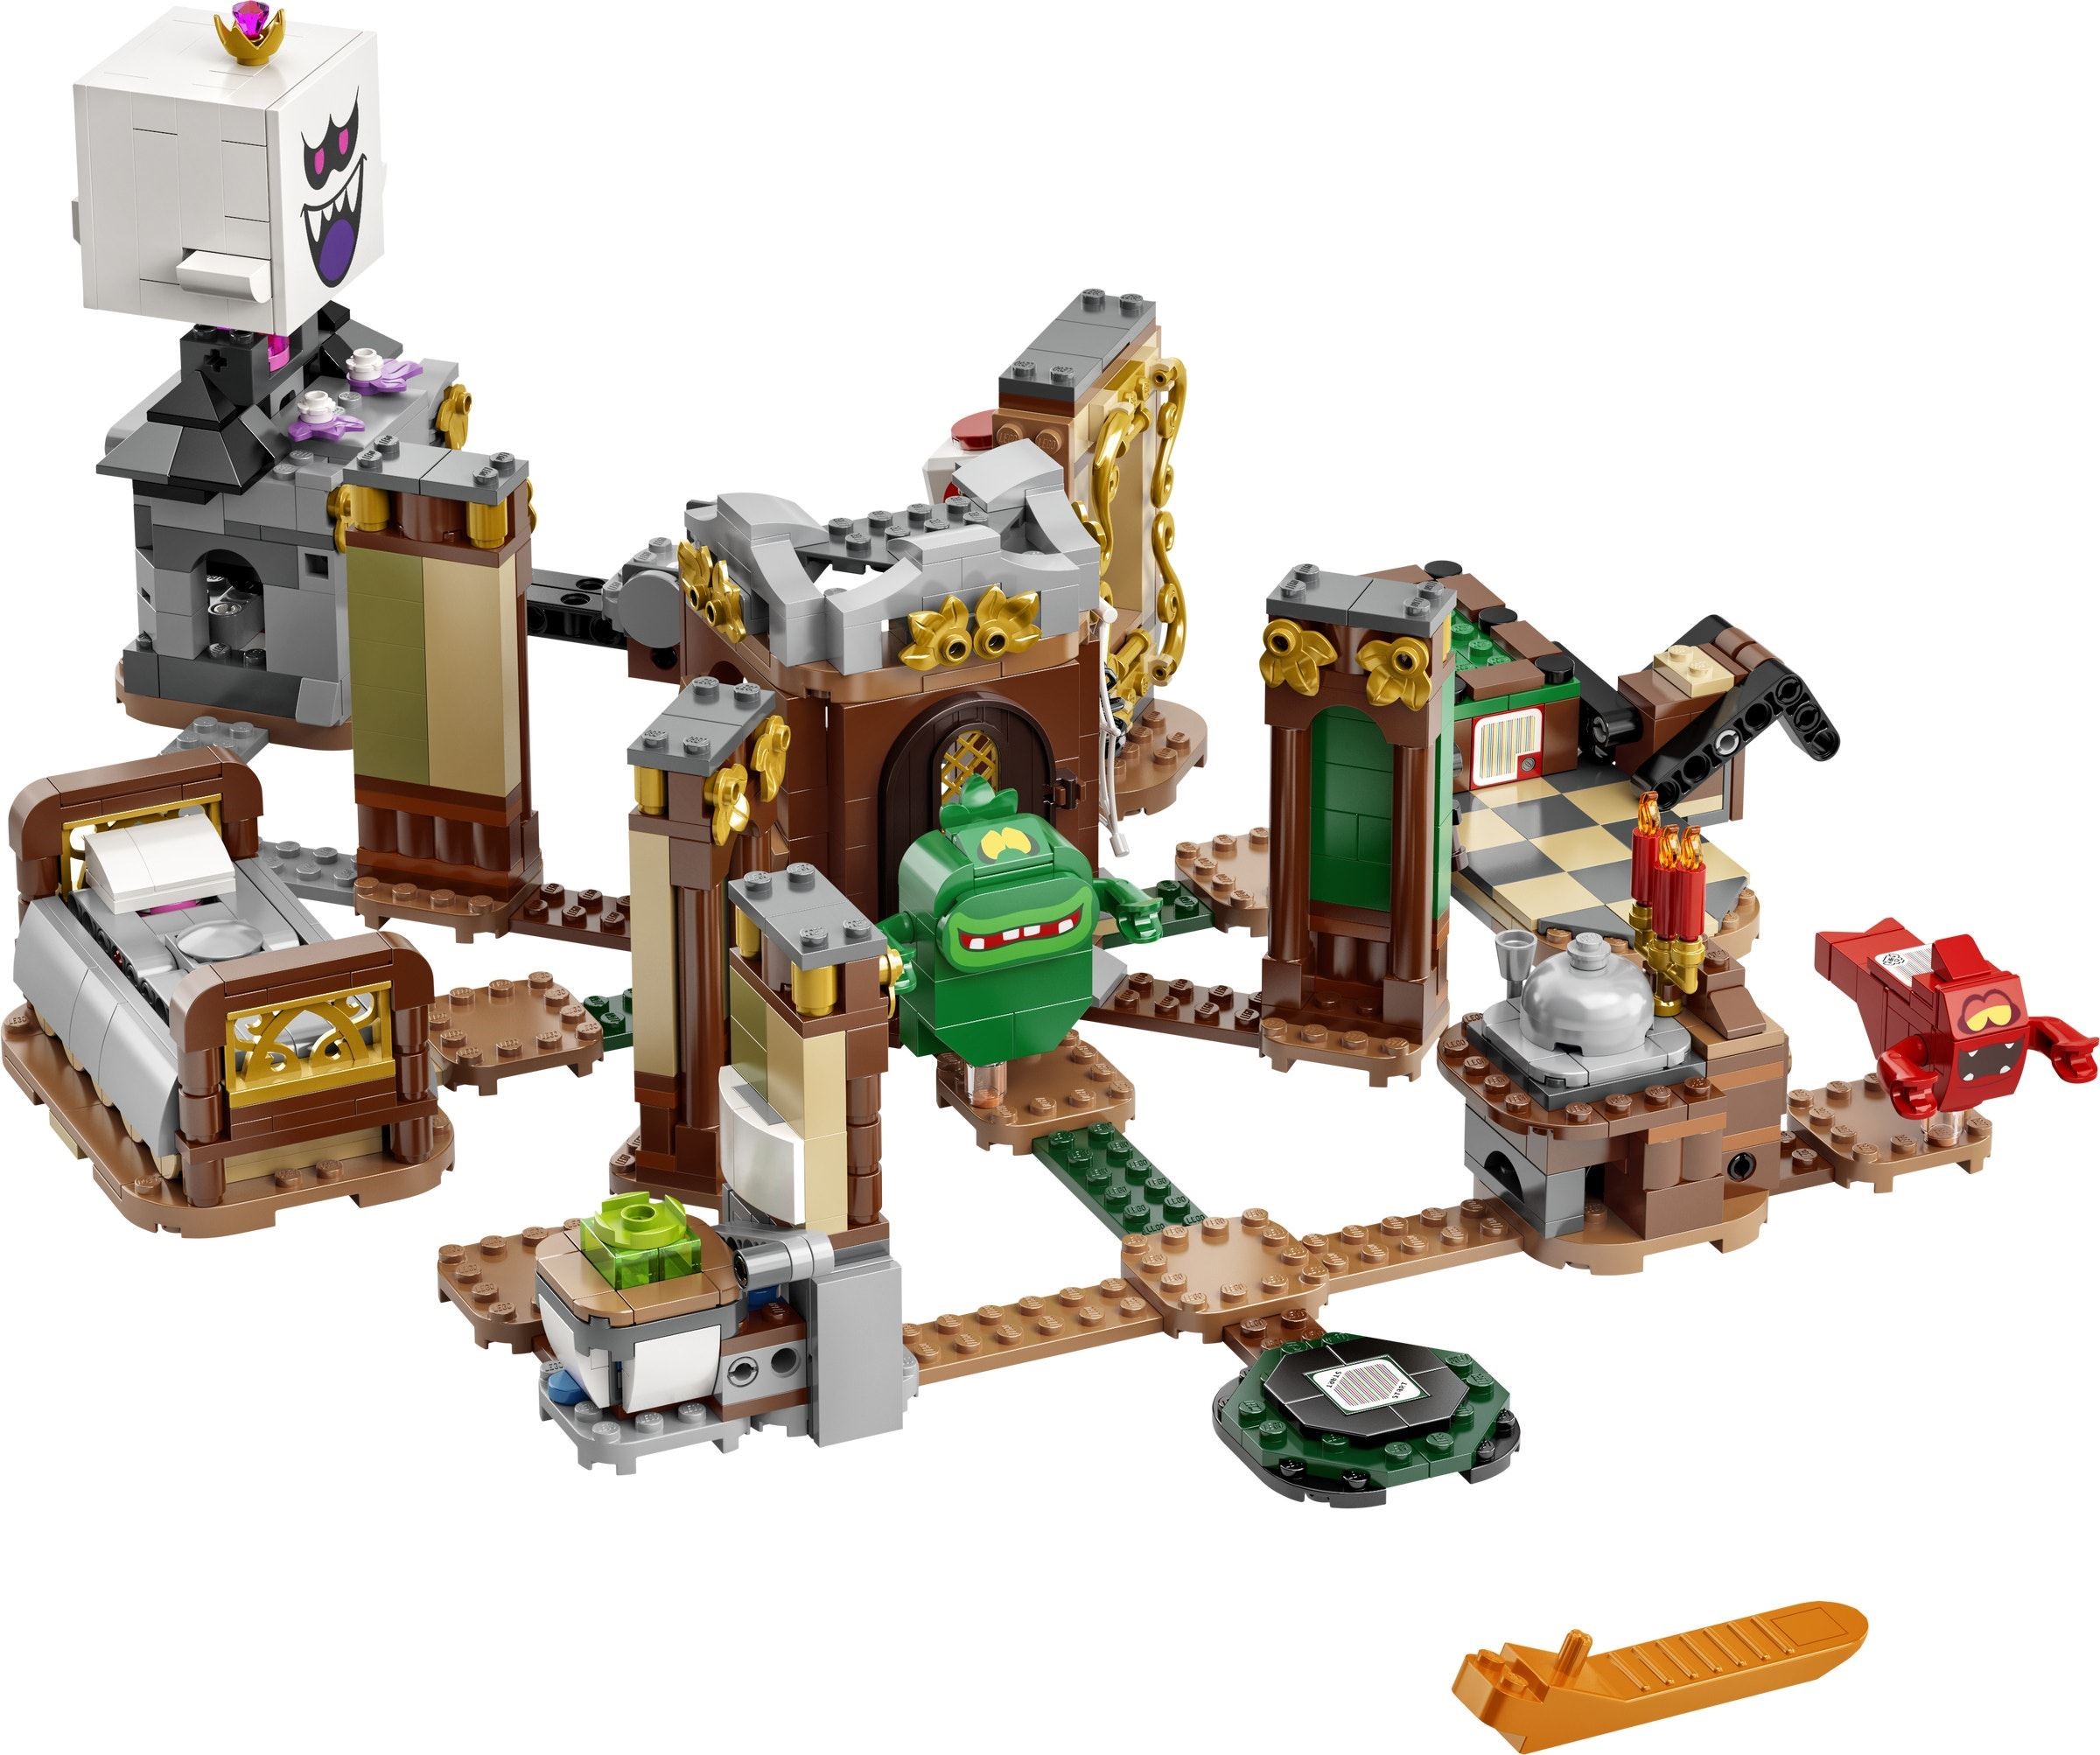 LEGO Friends 10th anniversary exclusive golden gift revealed